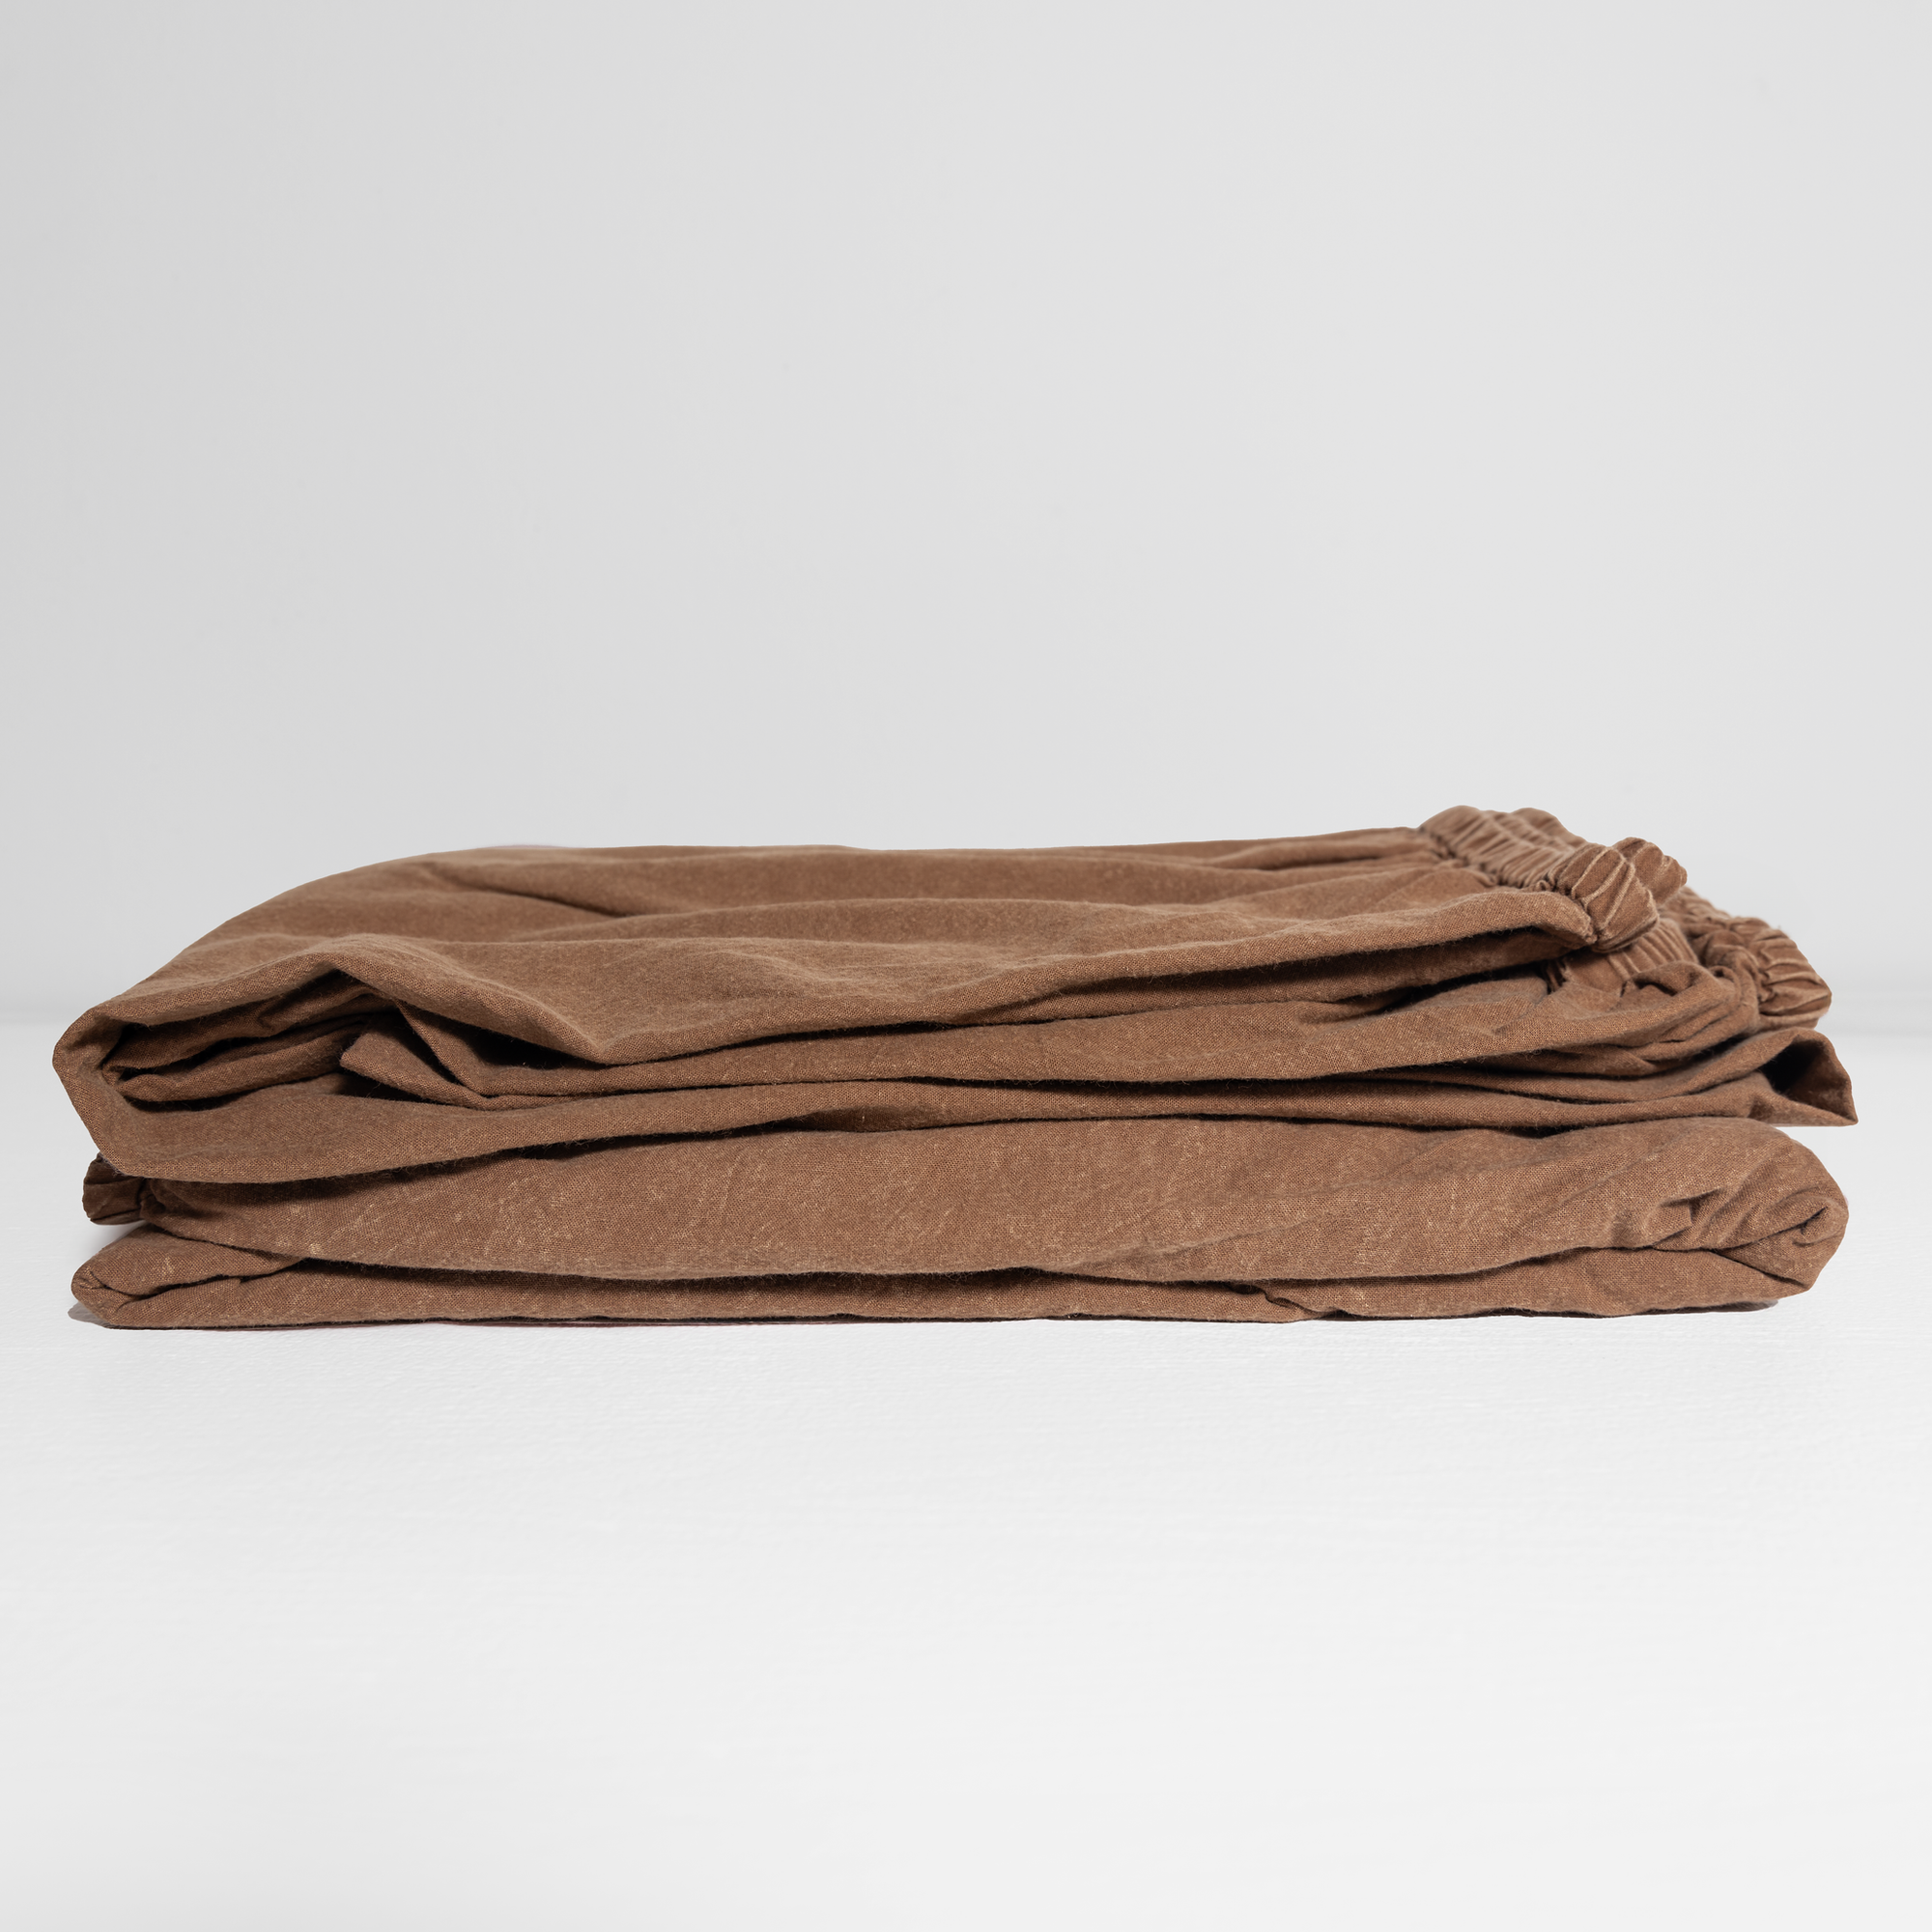 100% Organic Cotton Canvas Fitted Sheet │Queen │Tobacco